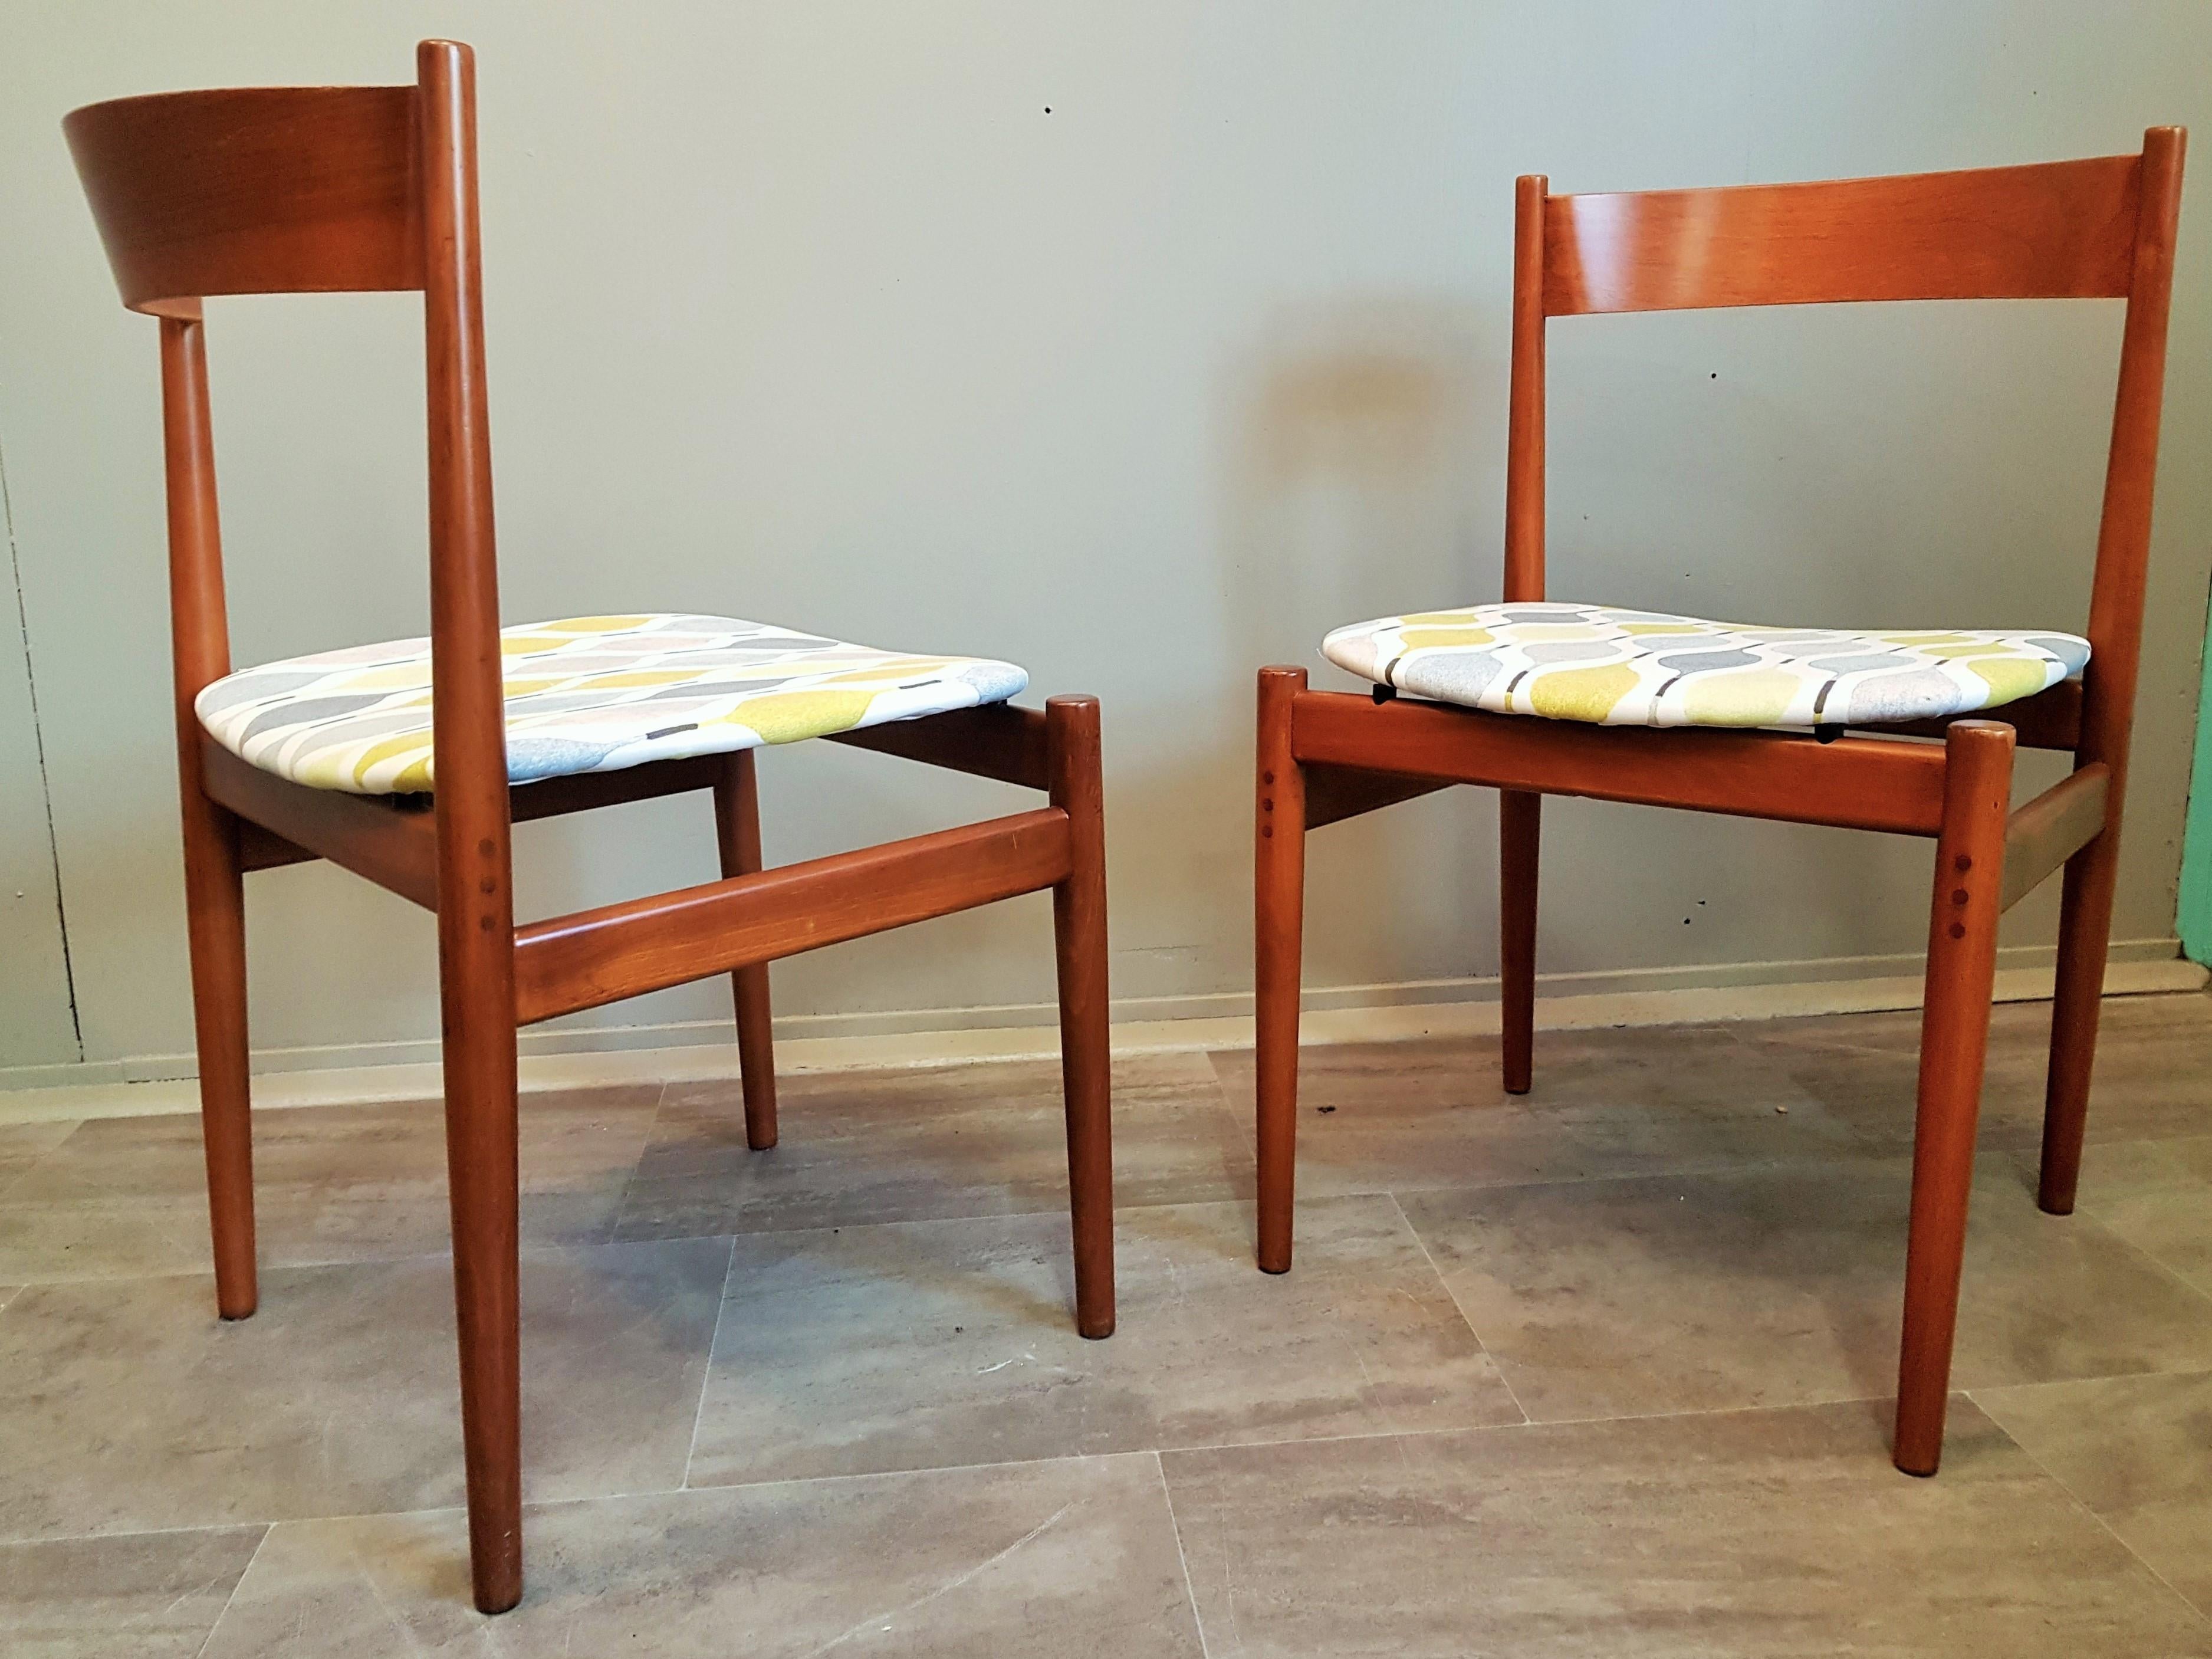 Teak Midcentury Set of 7 Dining Chairs Mod 101 by Frattini  for Cassina, Italy, 1960 For Sale